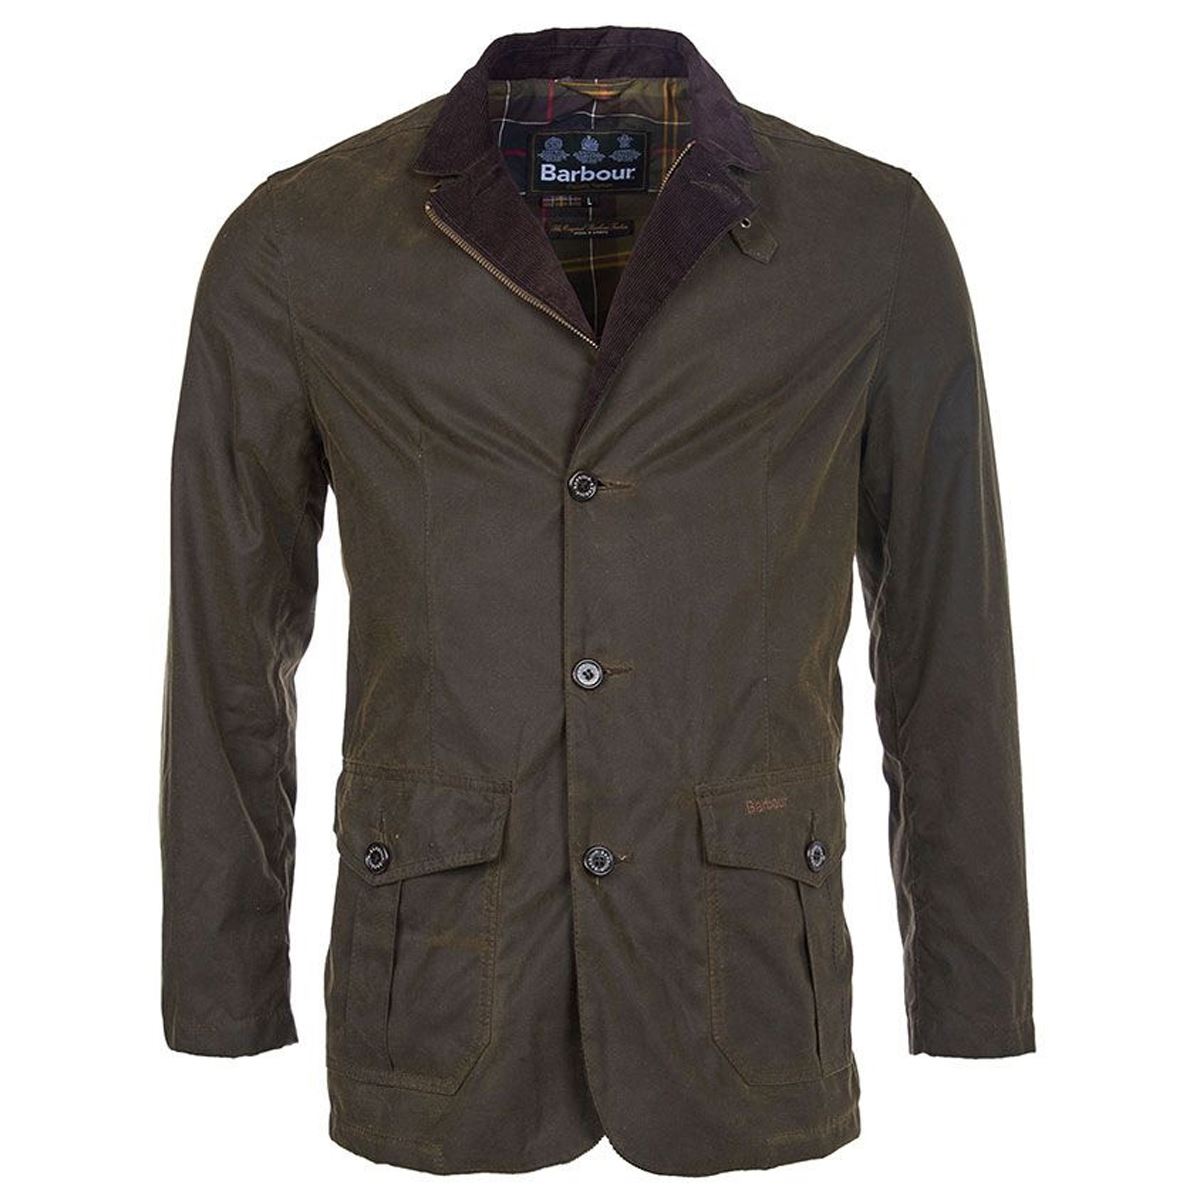 What are the specifics of the Barbour Lutz Wax Jacket?